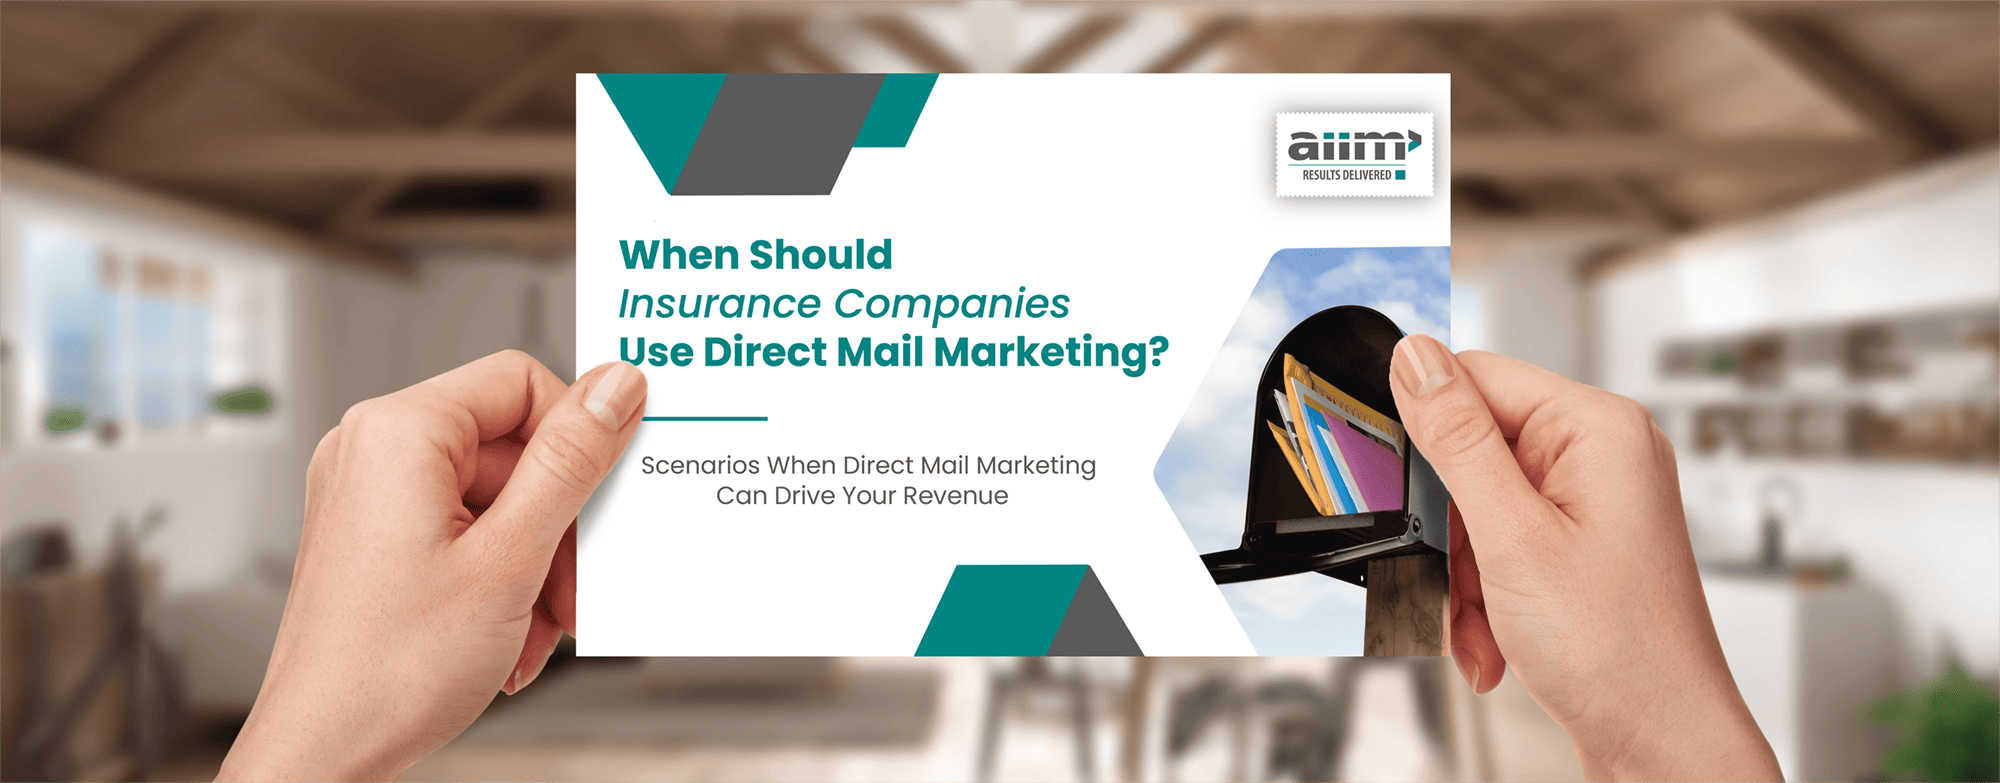 When Insurance companies use direct mail marketing